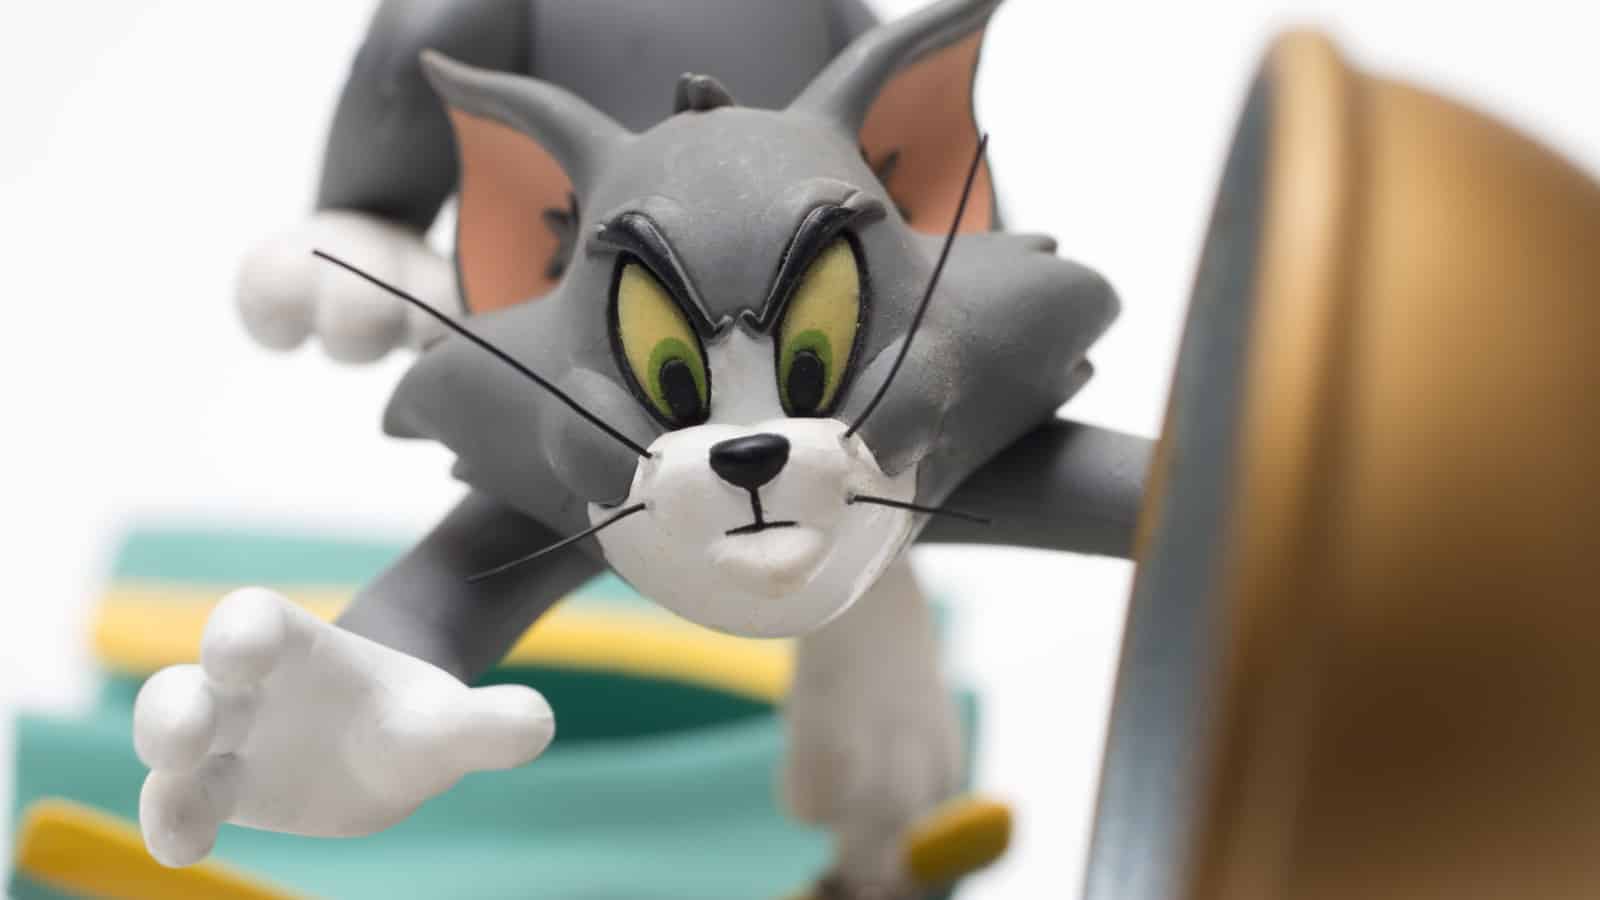 Figurine of Tom from Tom and Jerry